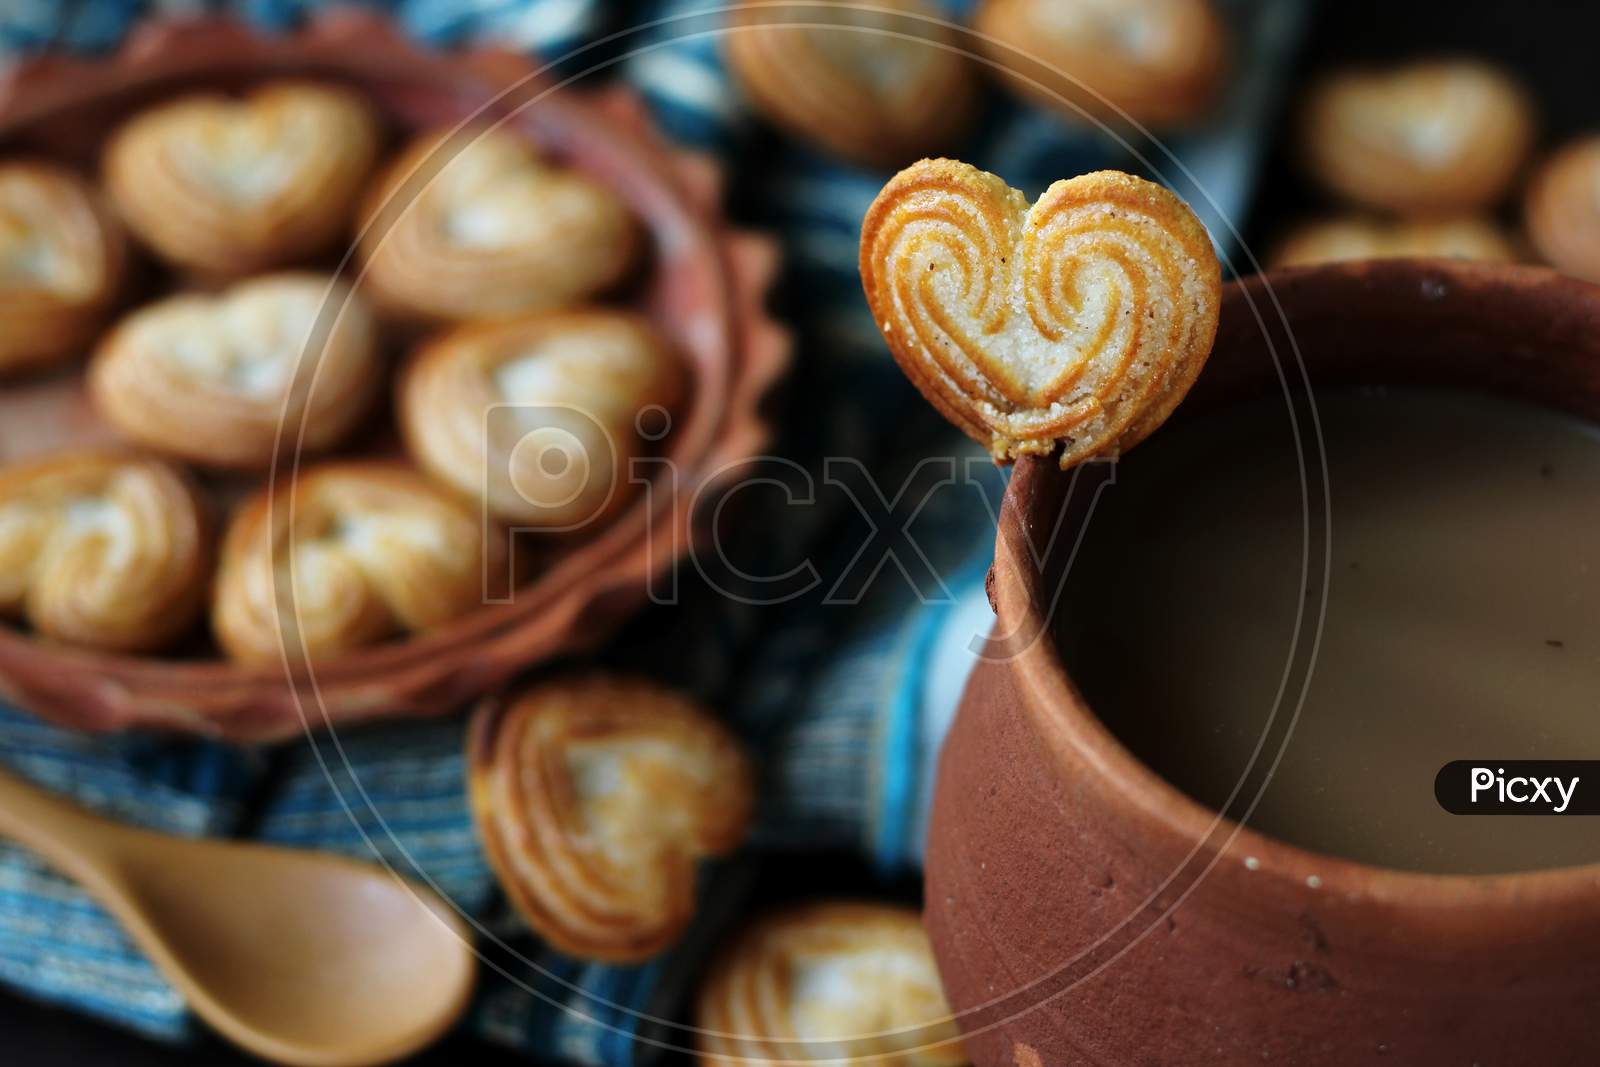 Earthen cup of tea with heart-shaped cookies